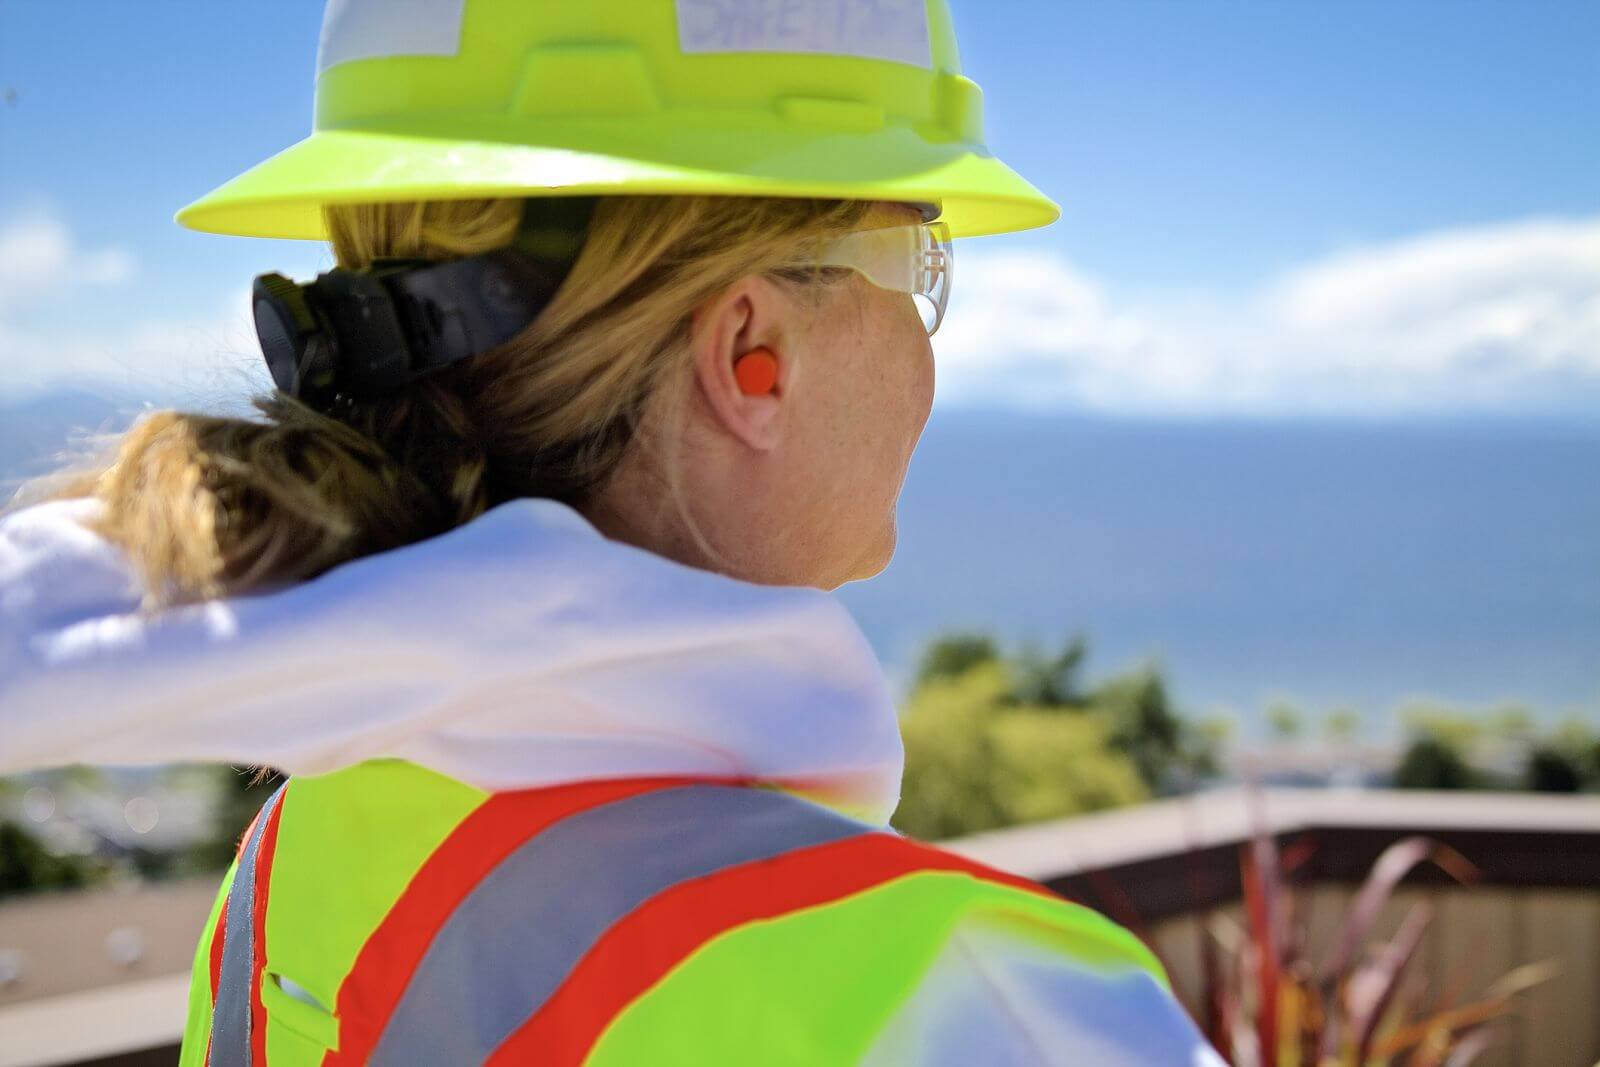 worker wearing hearing protection ear rmuffs